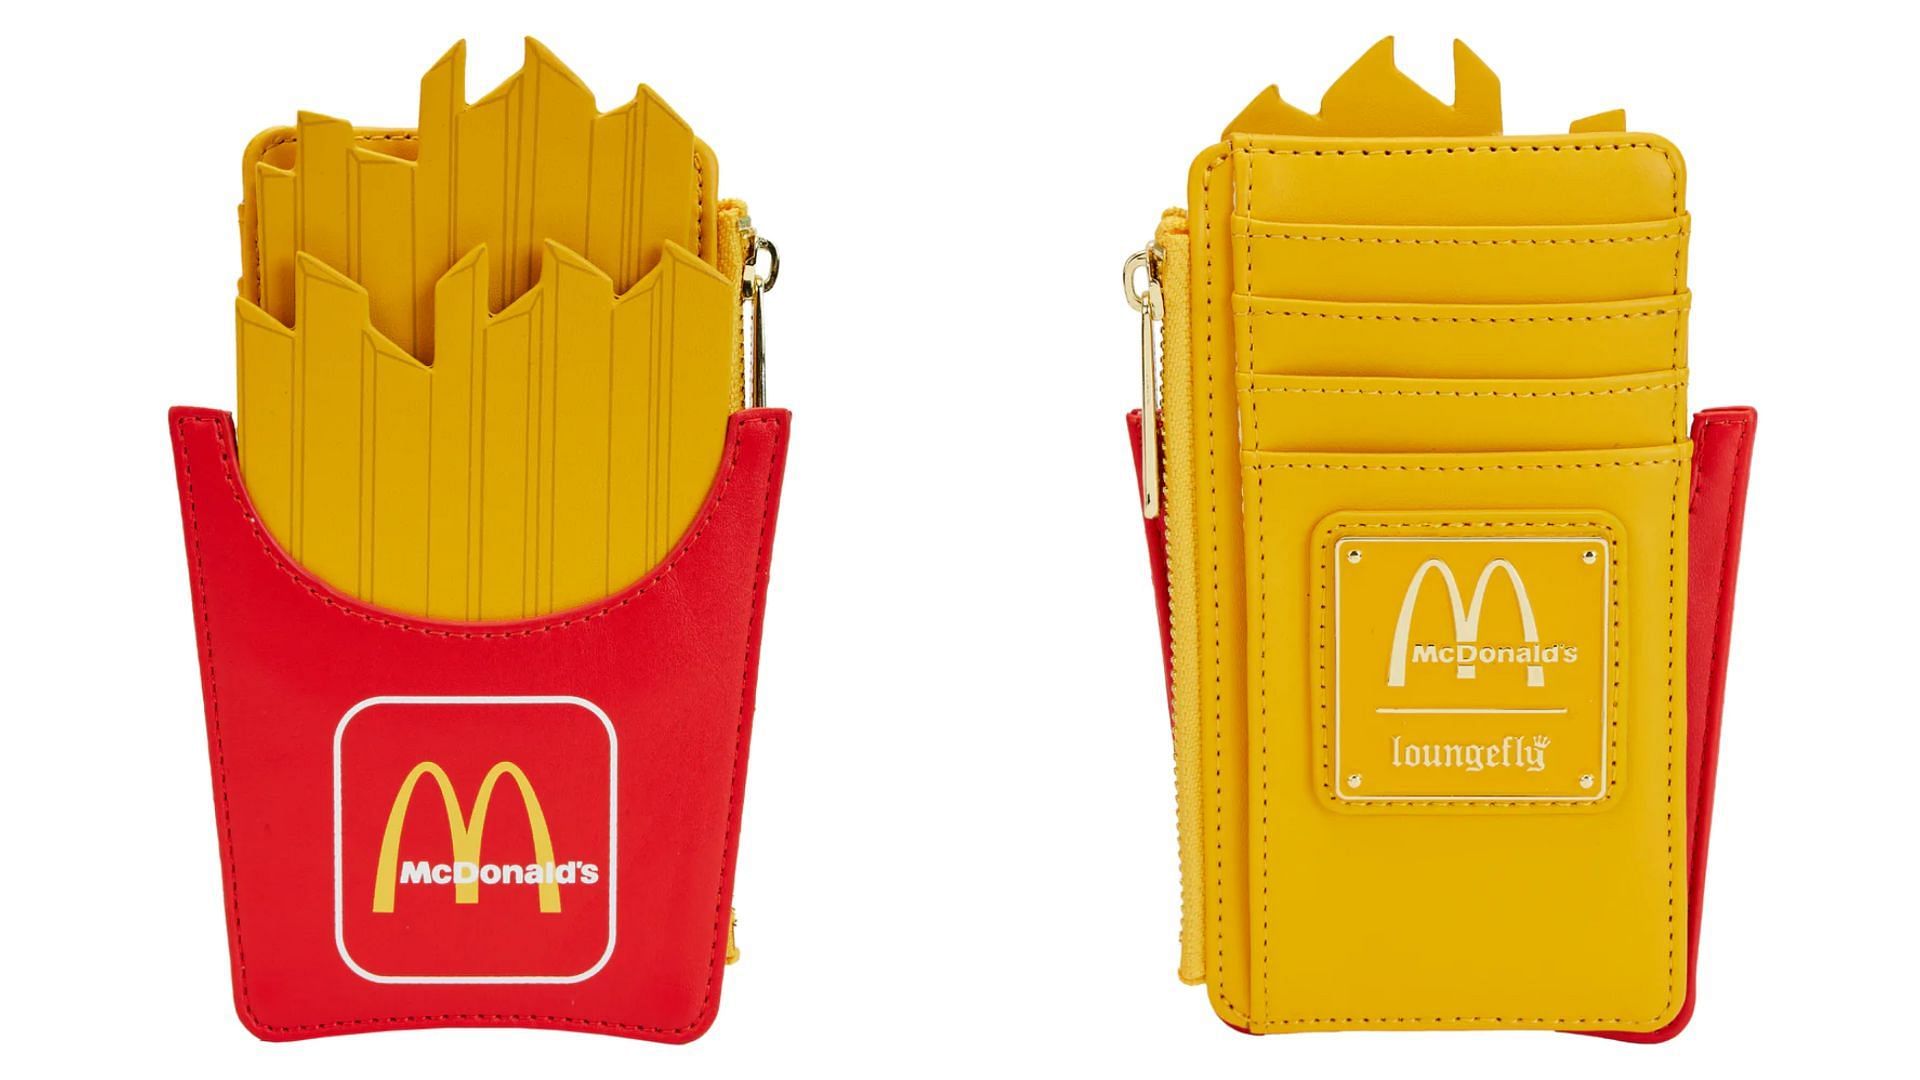 French Fry Card Holder (Image via Loungefly)